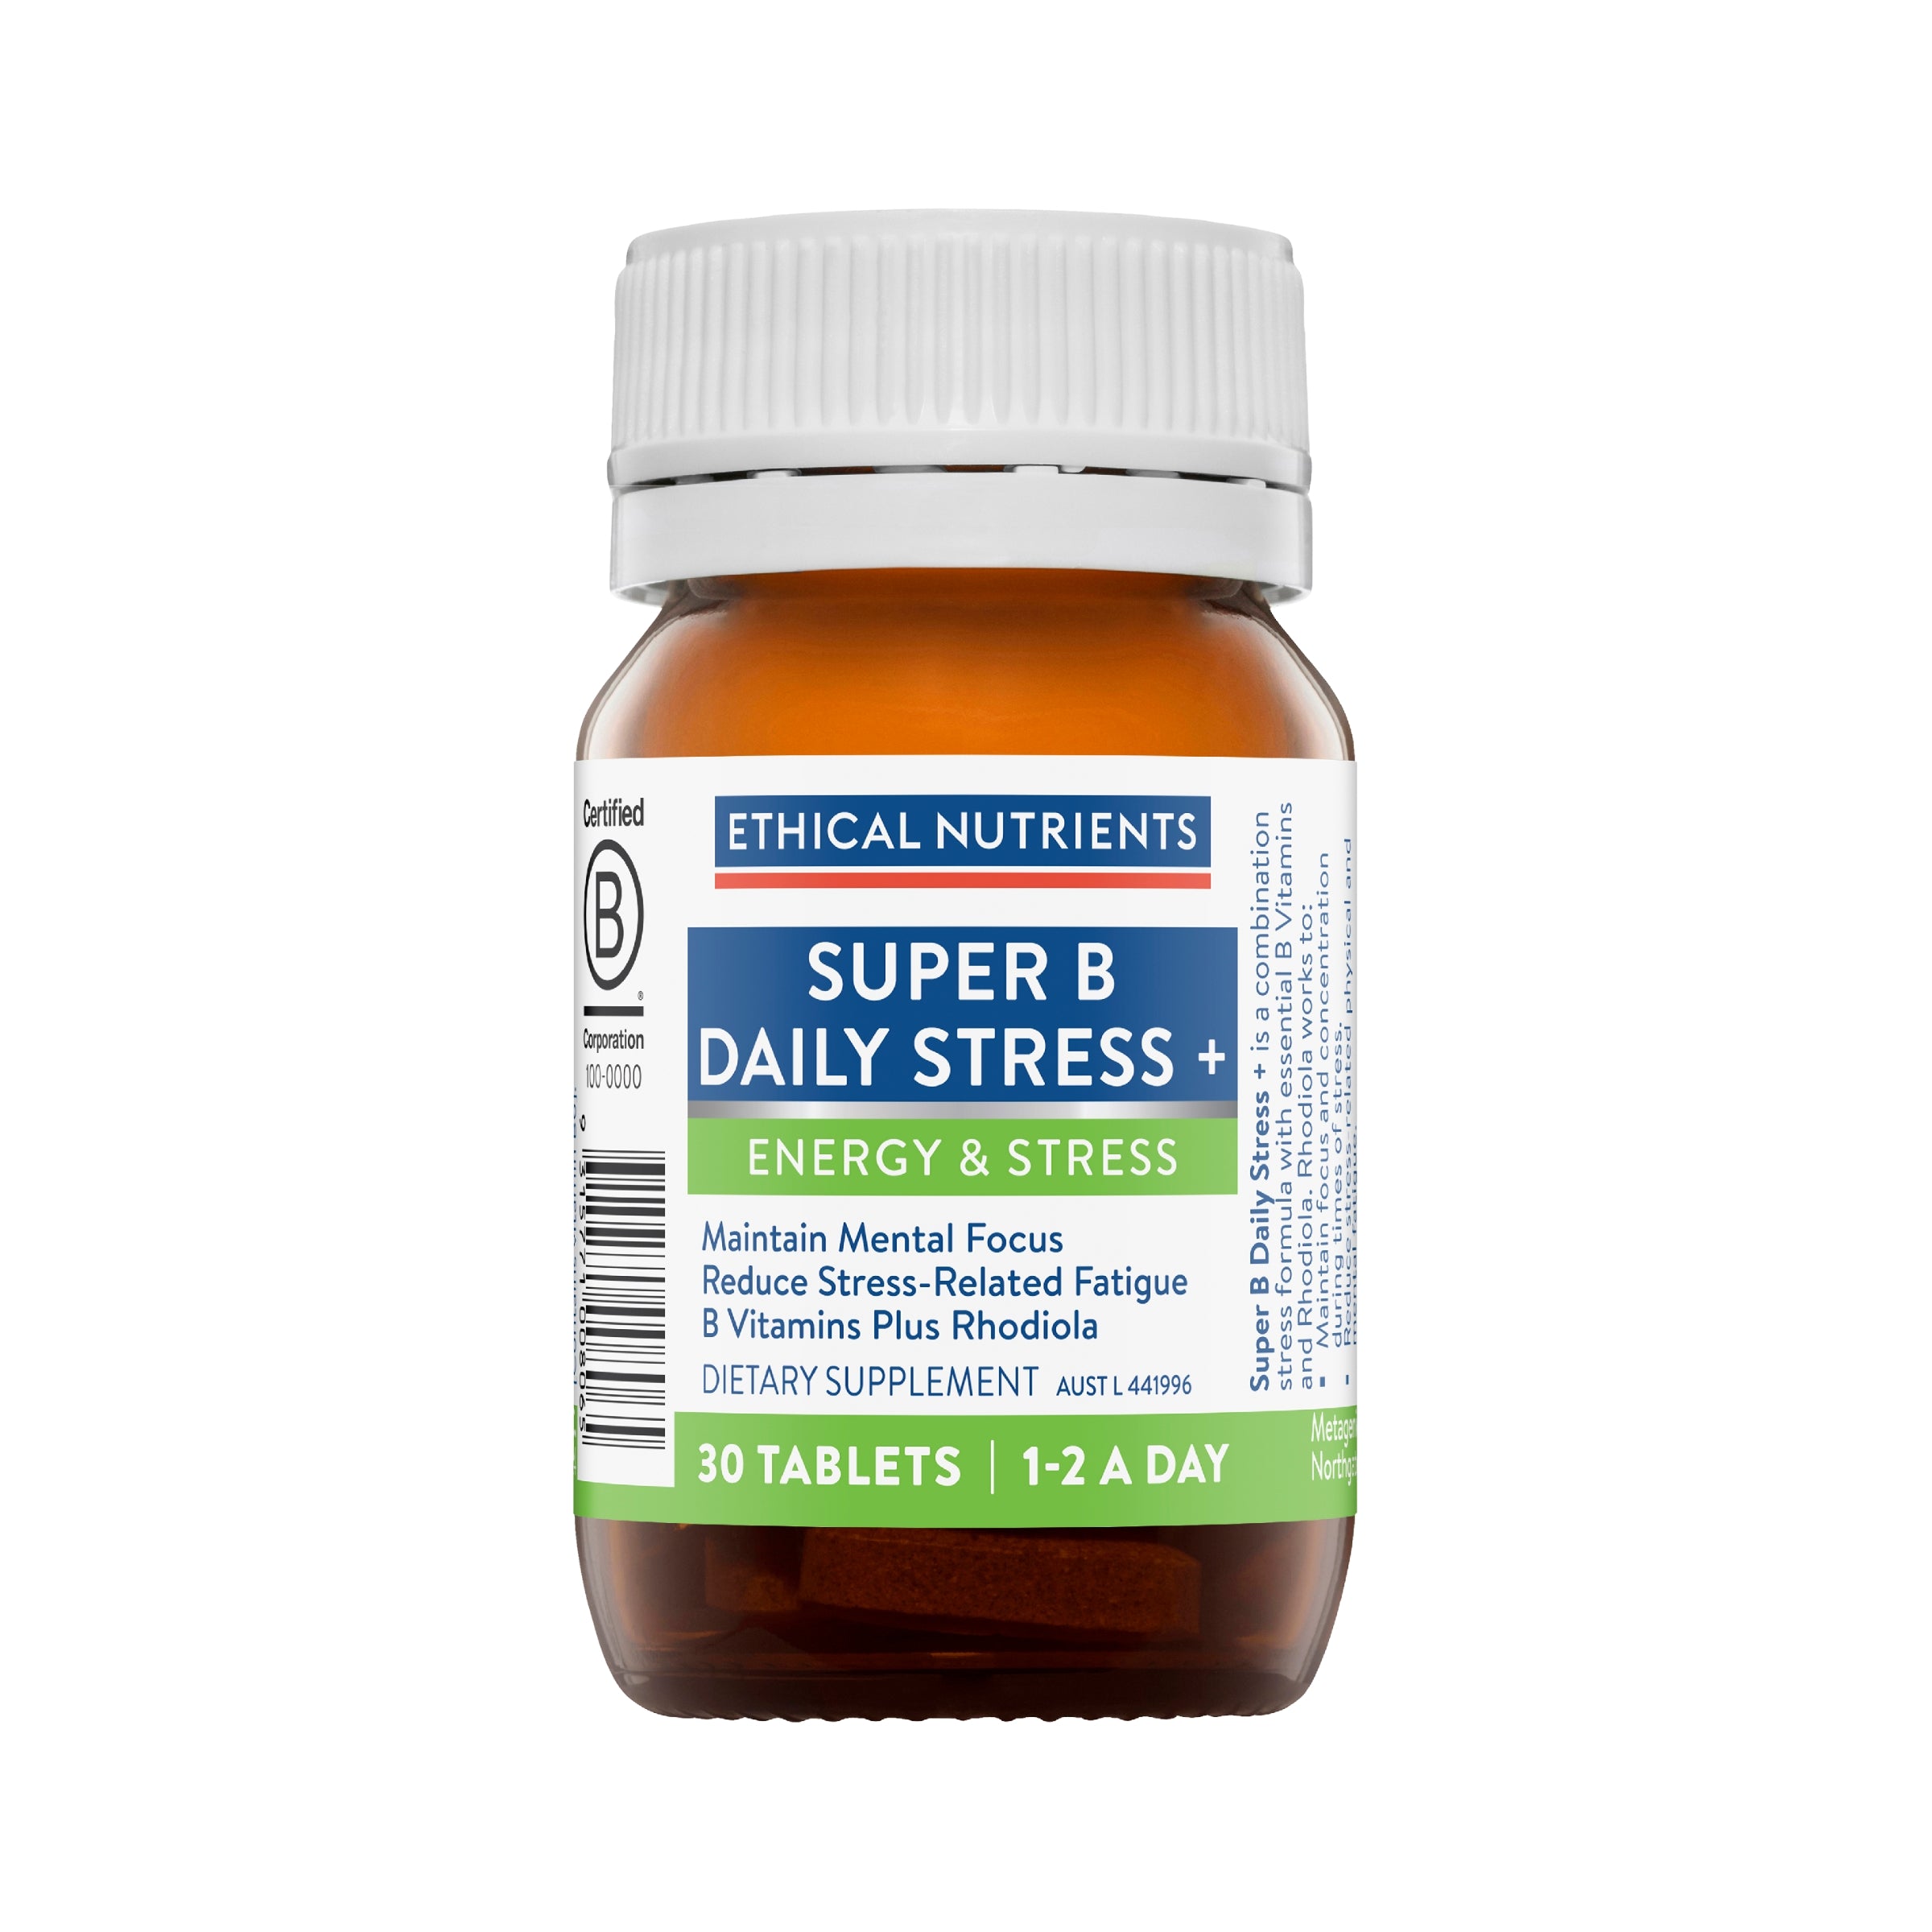 Ethical Nutrients Super B Daily Stress + 30 Tablets #size_30 tablets